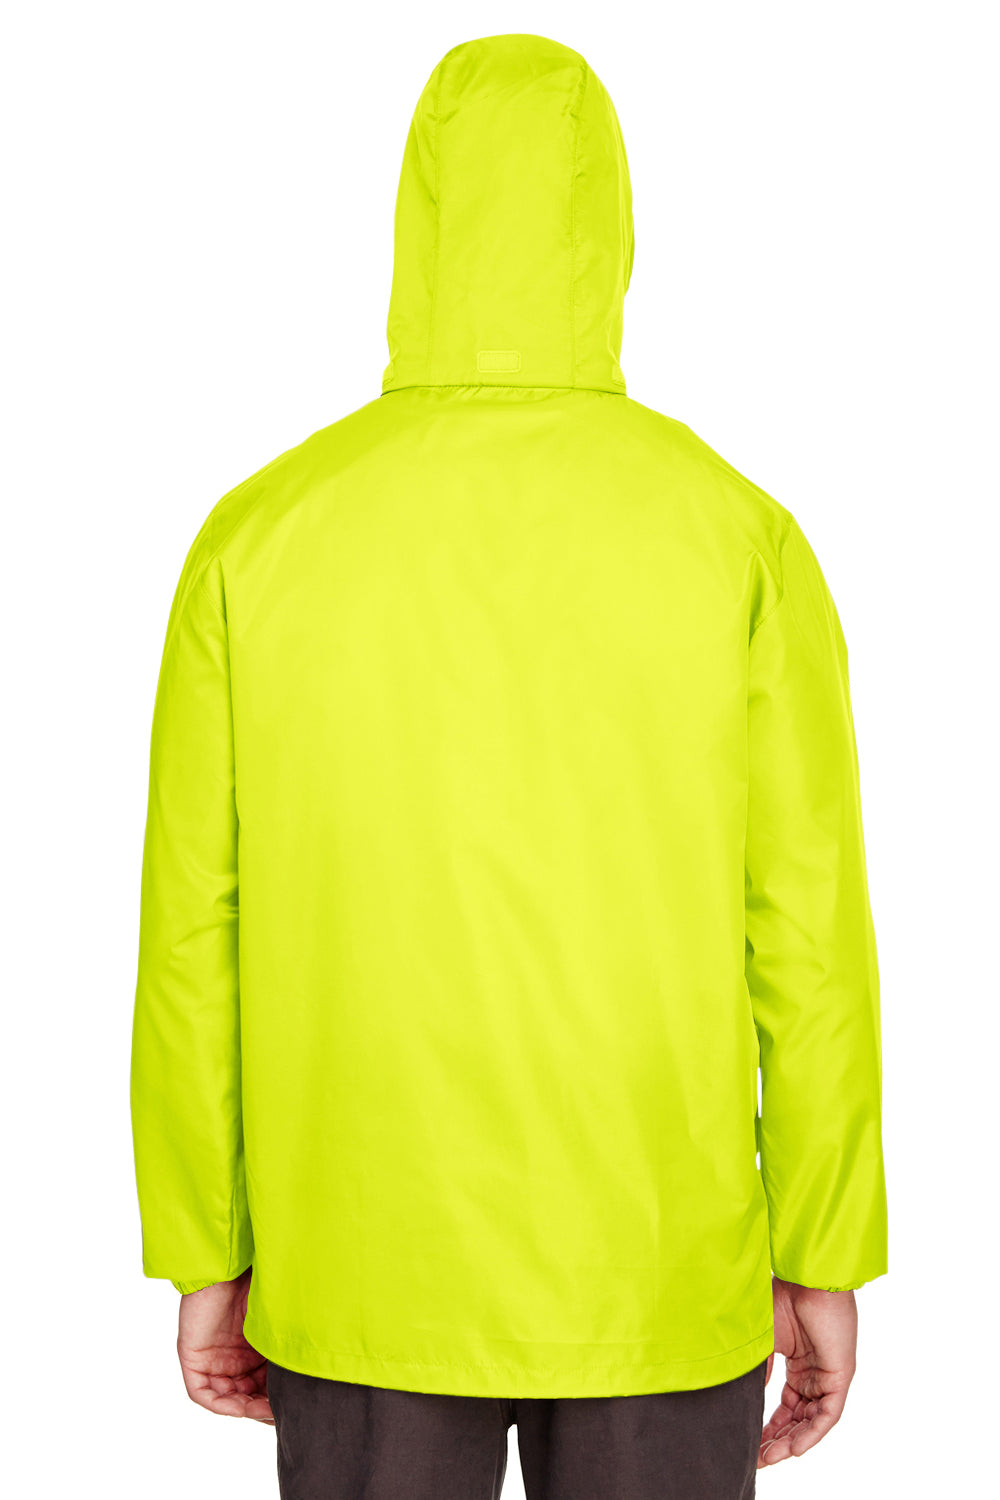 Team 365 TT73 Mens Zone Protect Water Resistant Full Zip Hooded Jacket Safety Yellow Back